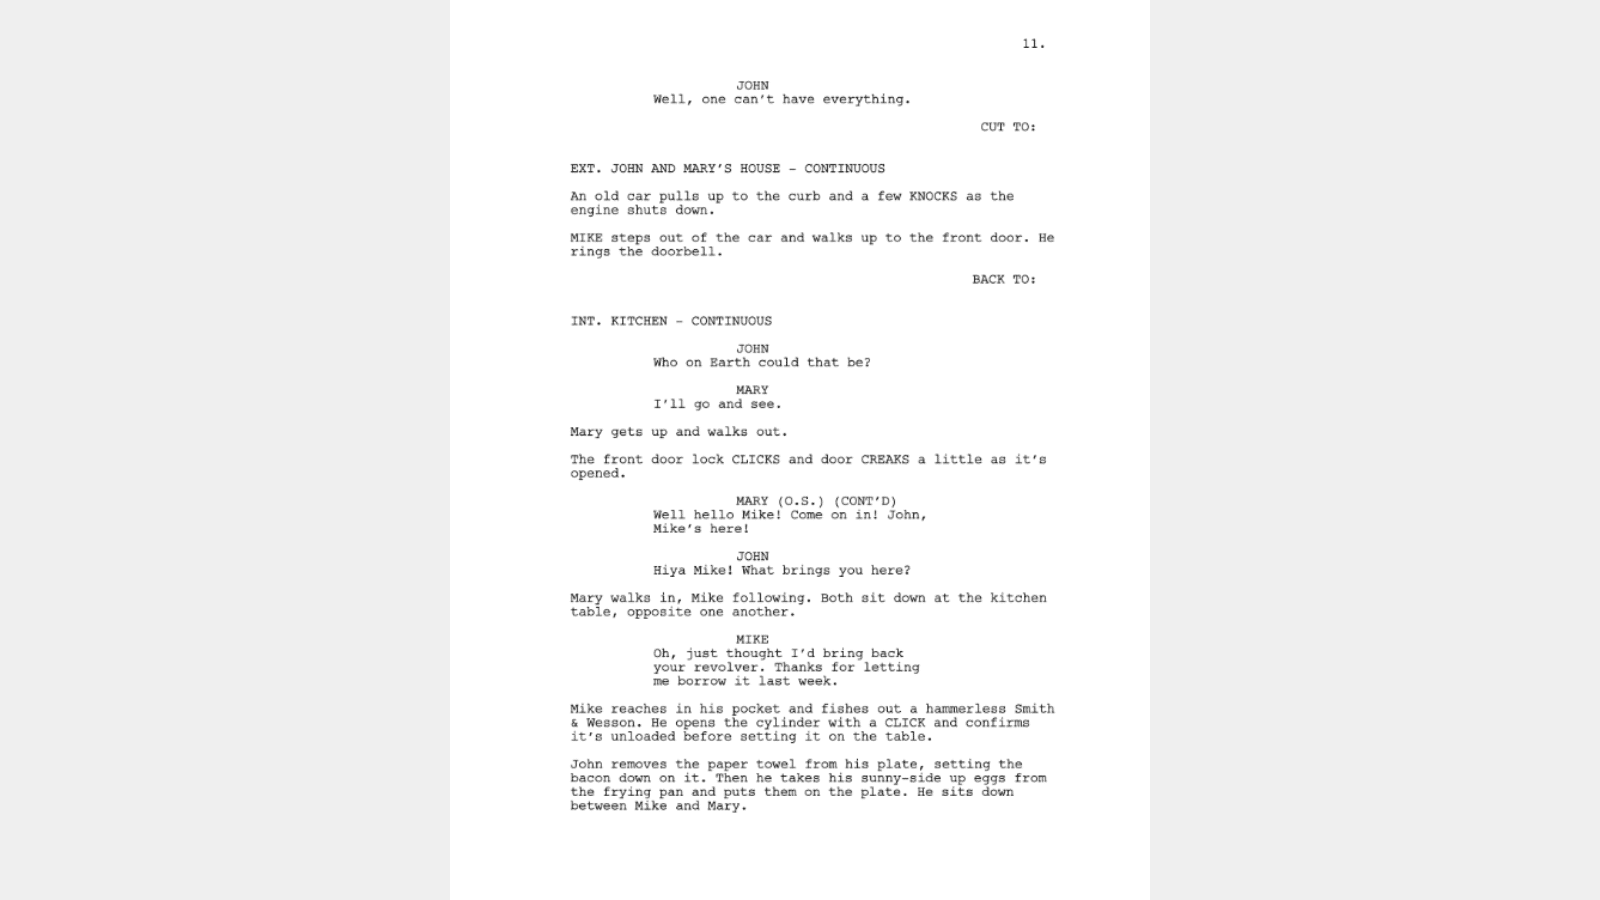 Example of an Hollywood screenplay script